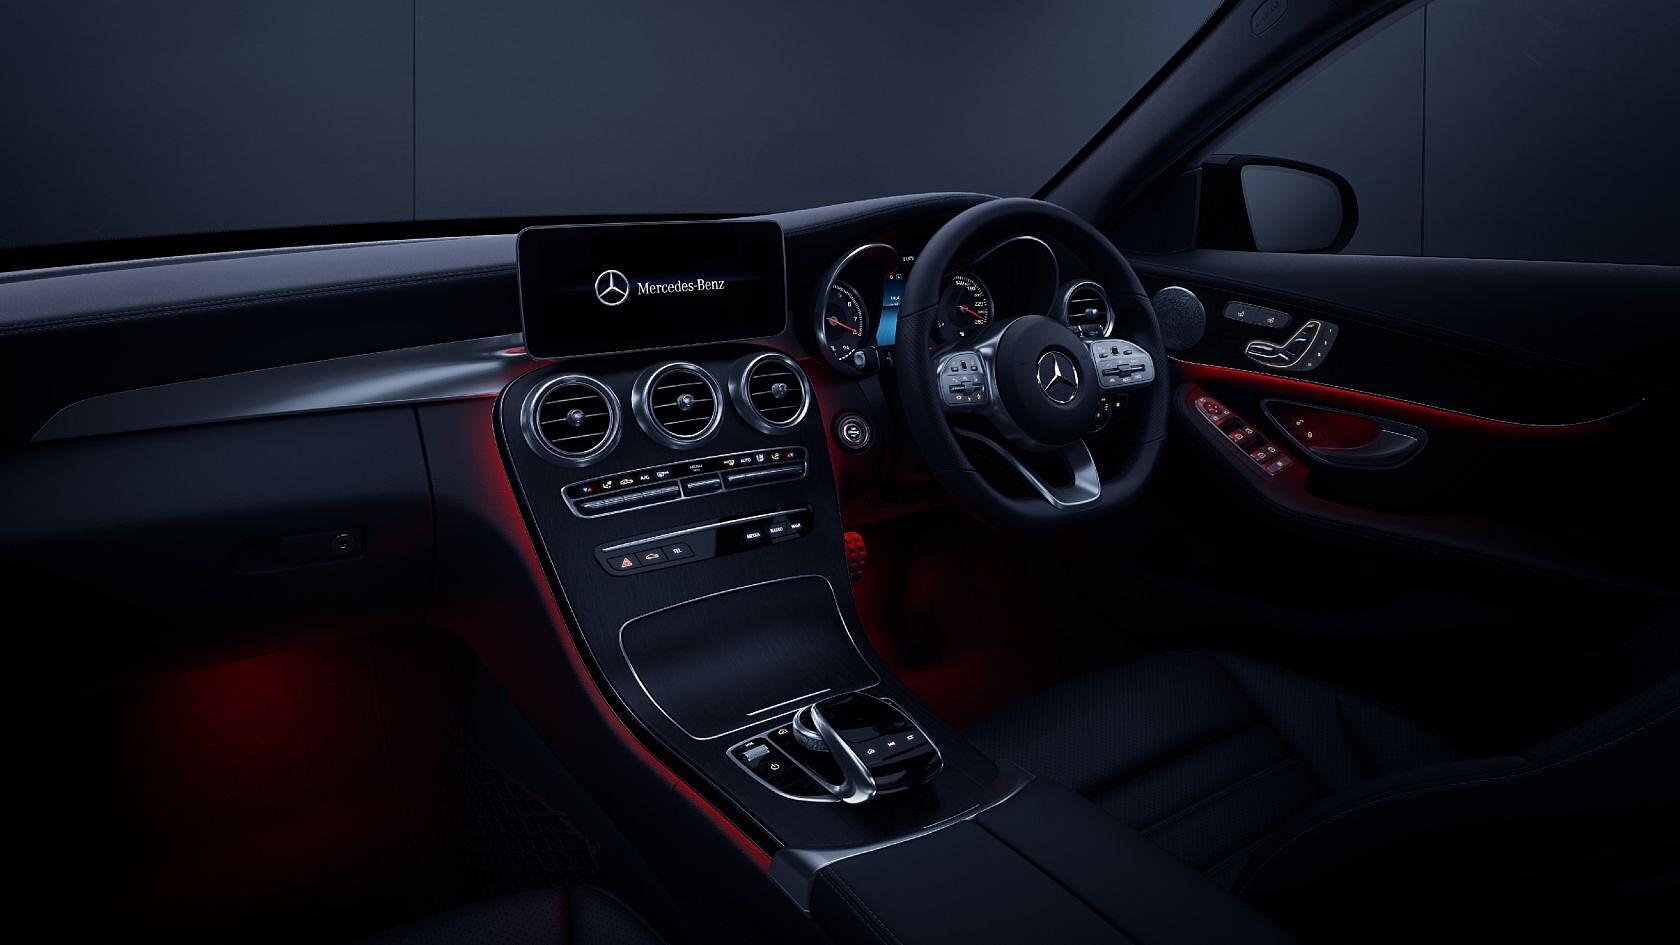 Mercedes Benz C Class Images Interior Exterior Photo Gallery 0 Images Carwale